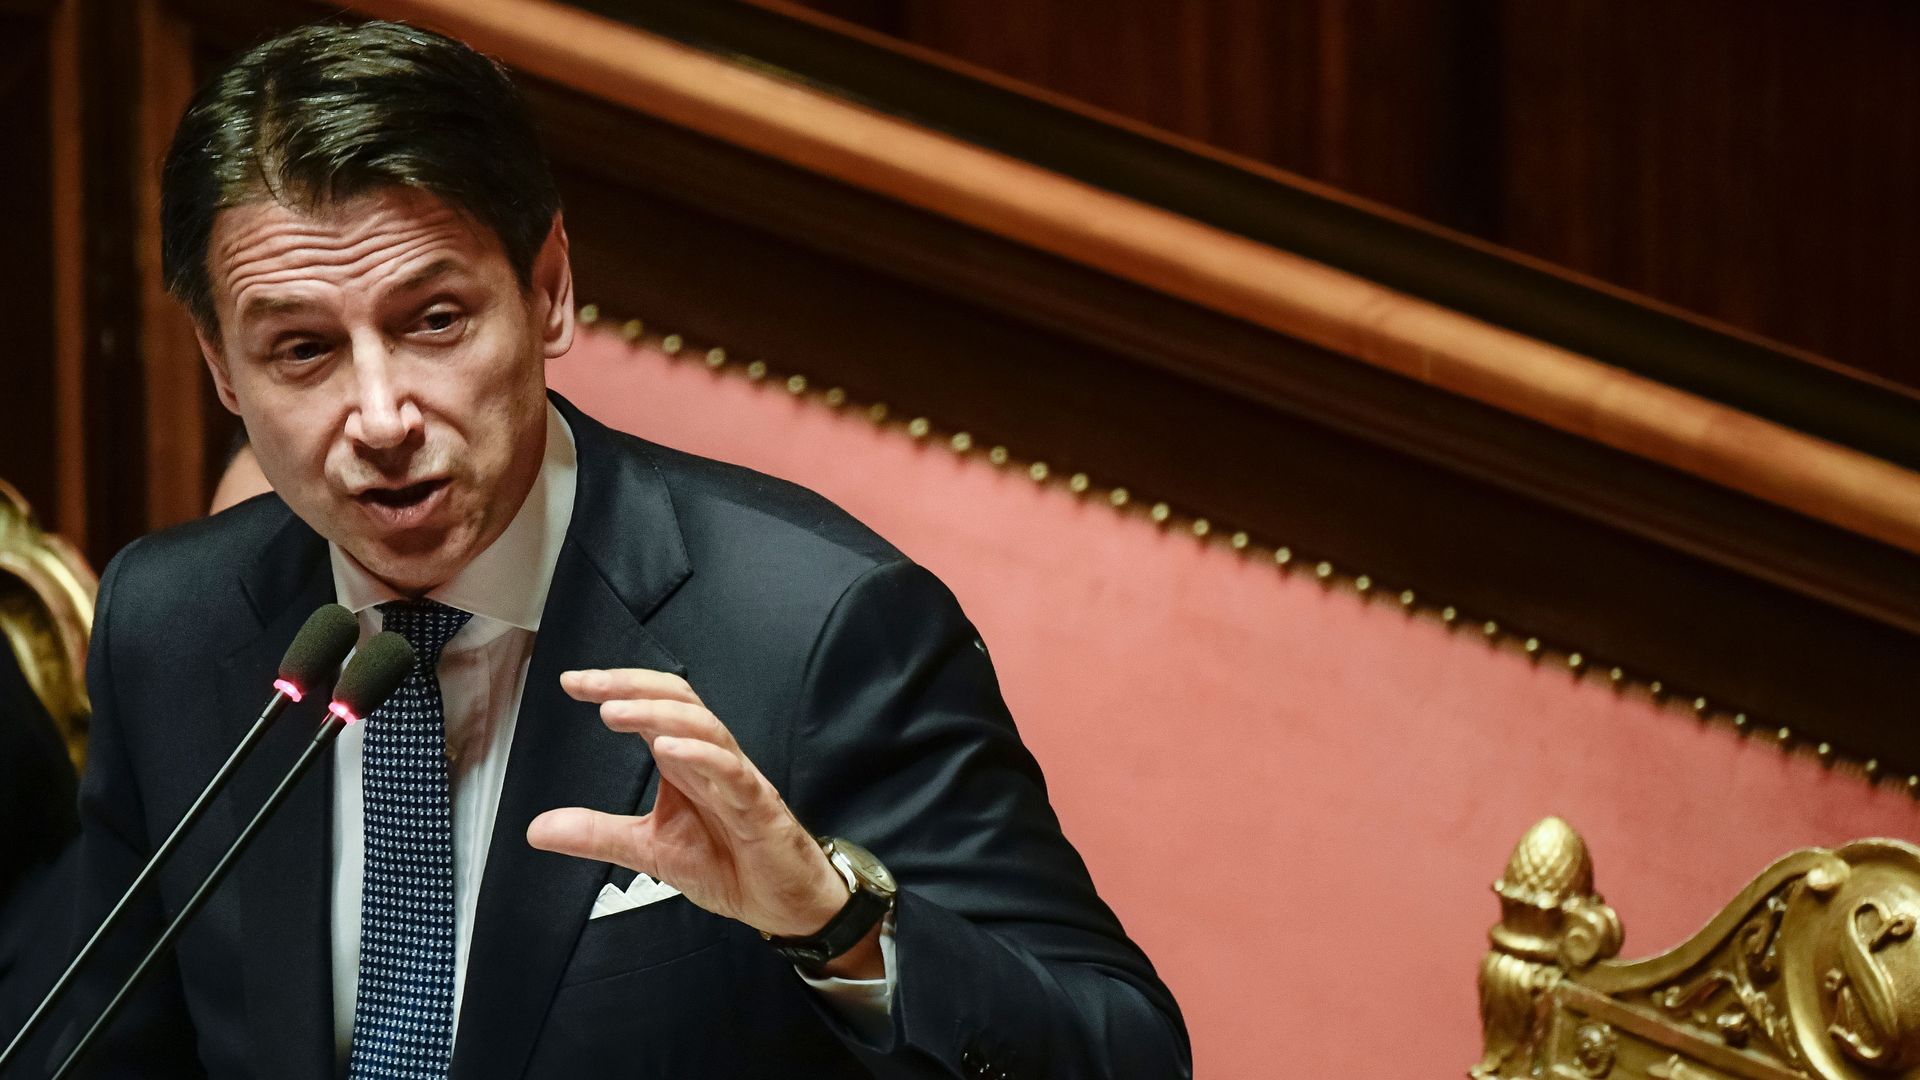 In this image, Italian Prime Minister Giuseppe Conte speaks into a microphone